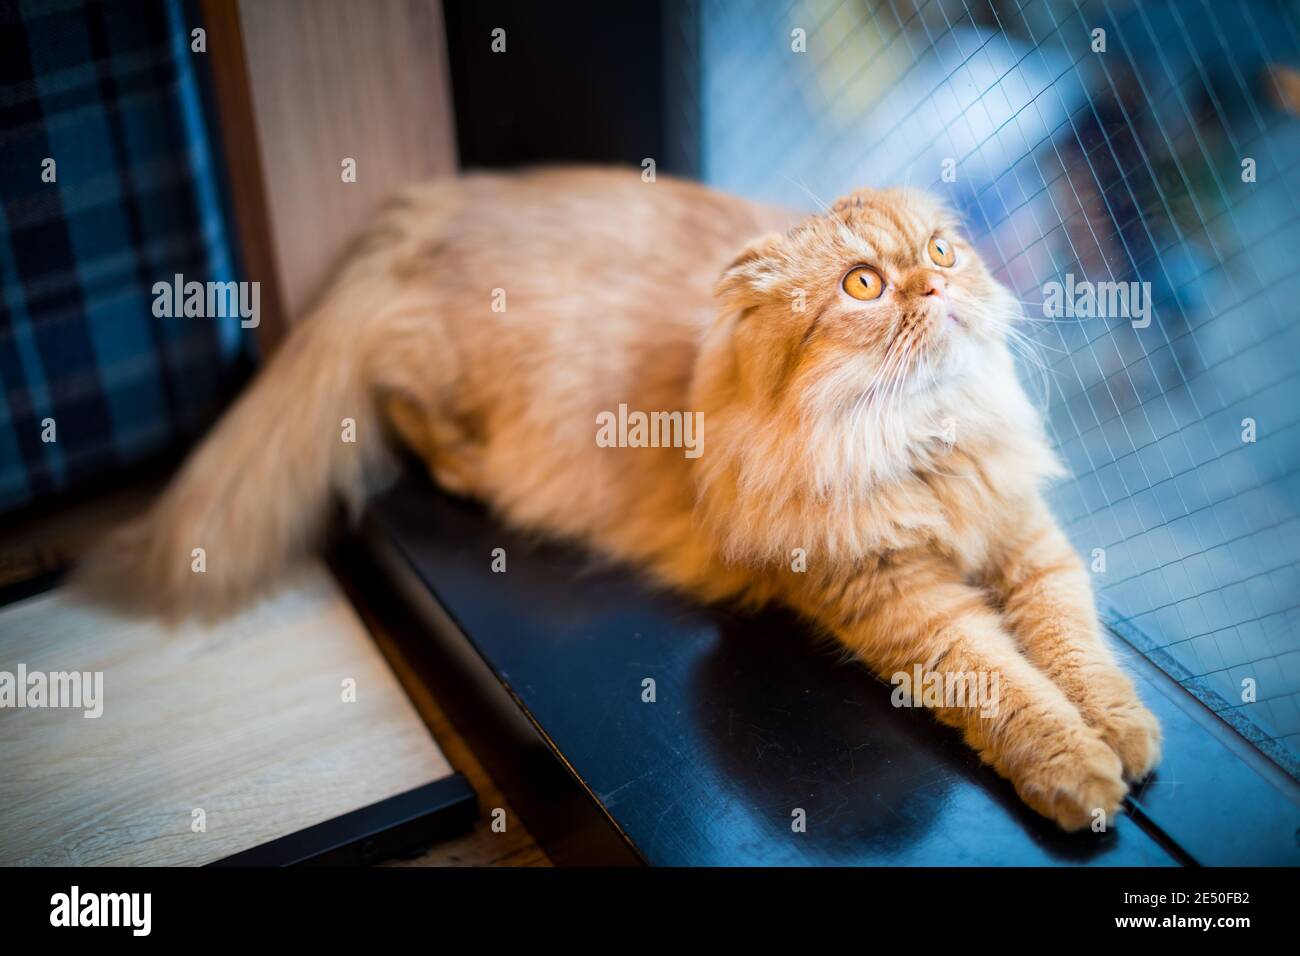 Close up of a ginger furry cat with ginger eyes sitting on a shelf close to a window and looking up Stock Photo